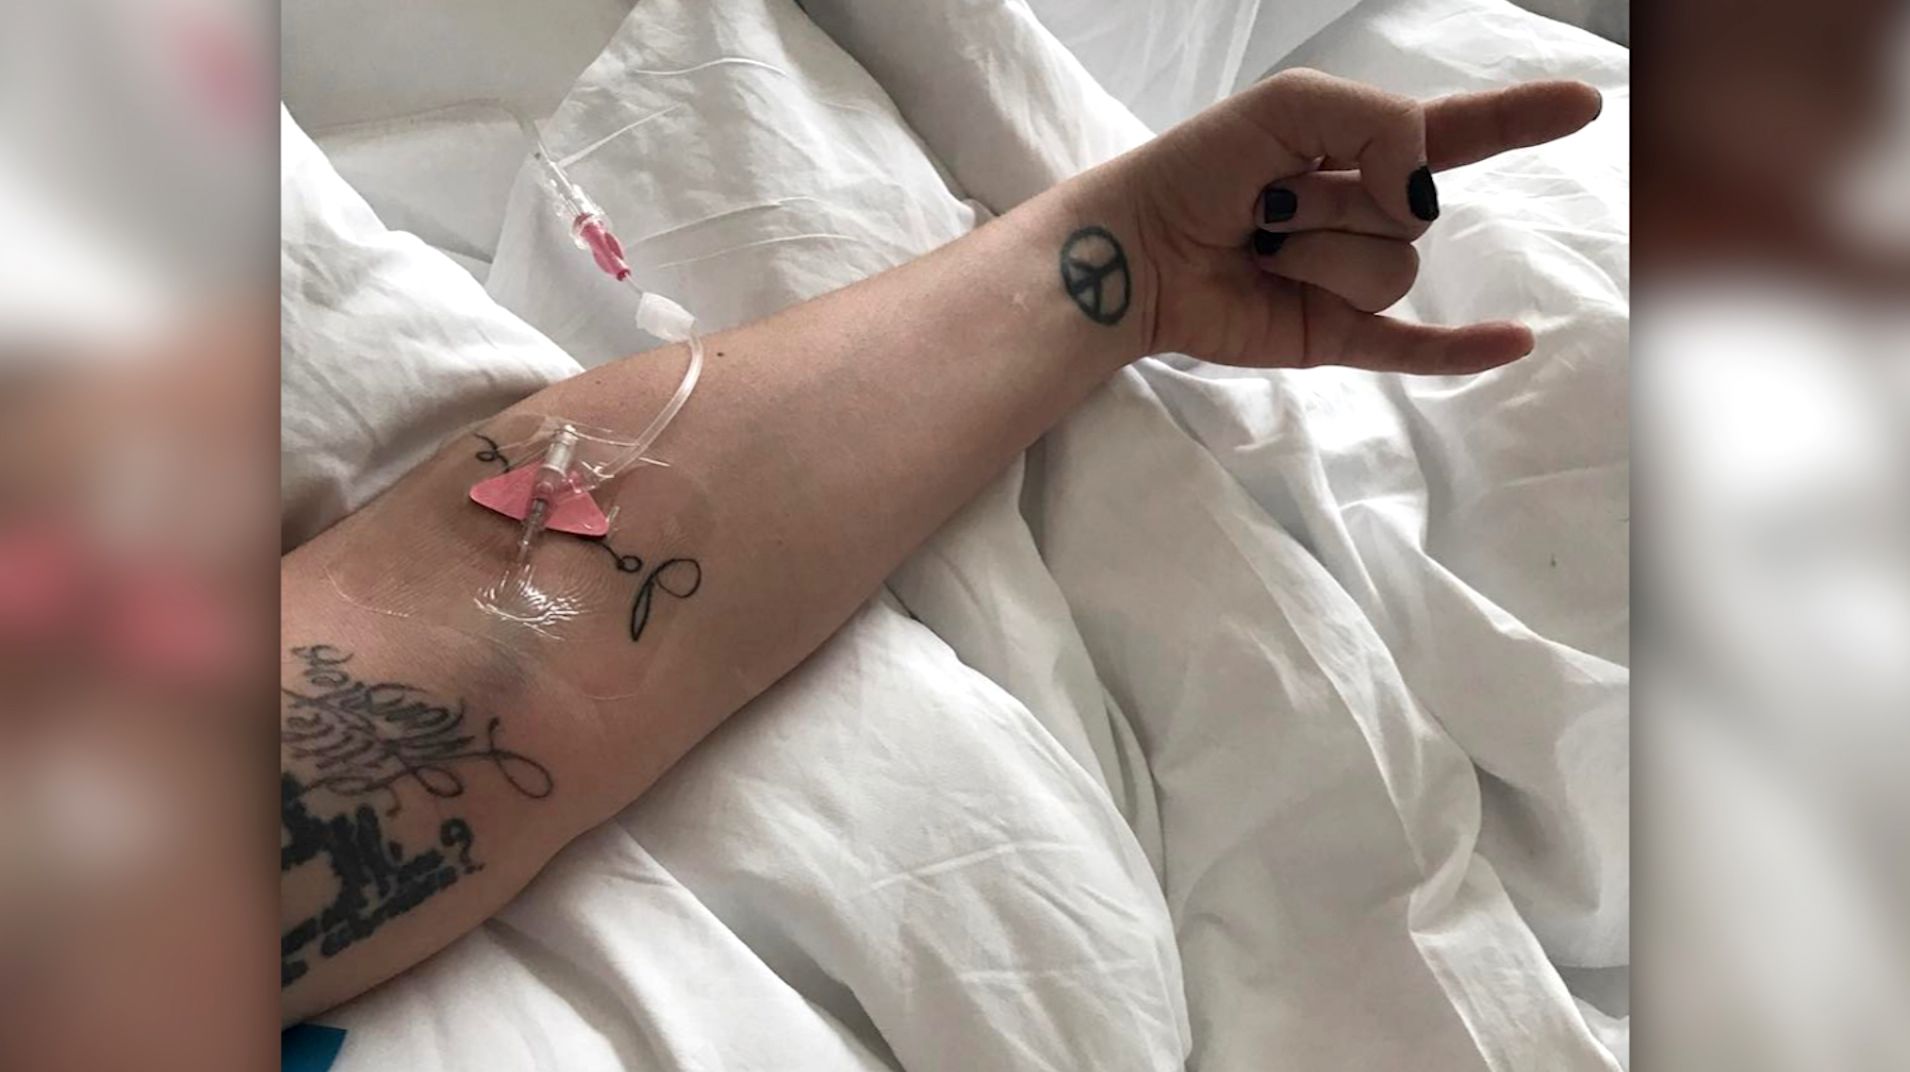 Lady Gaga Reveals Family Member Was Hospitalized for 2 Months in